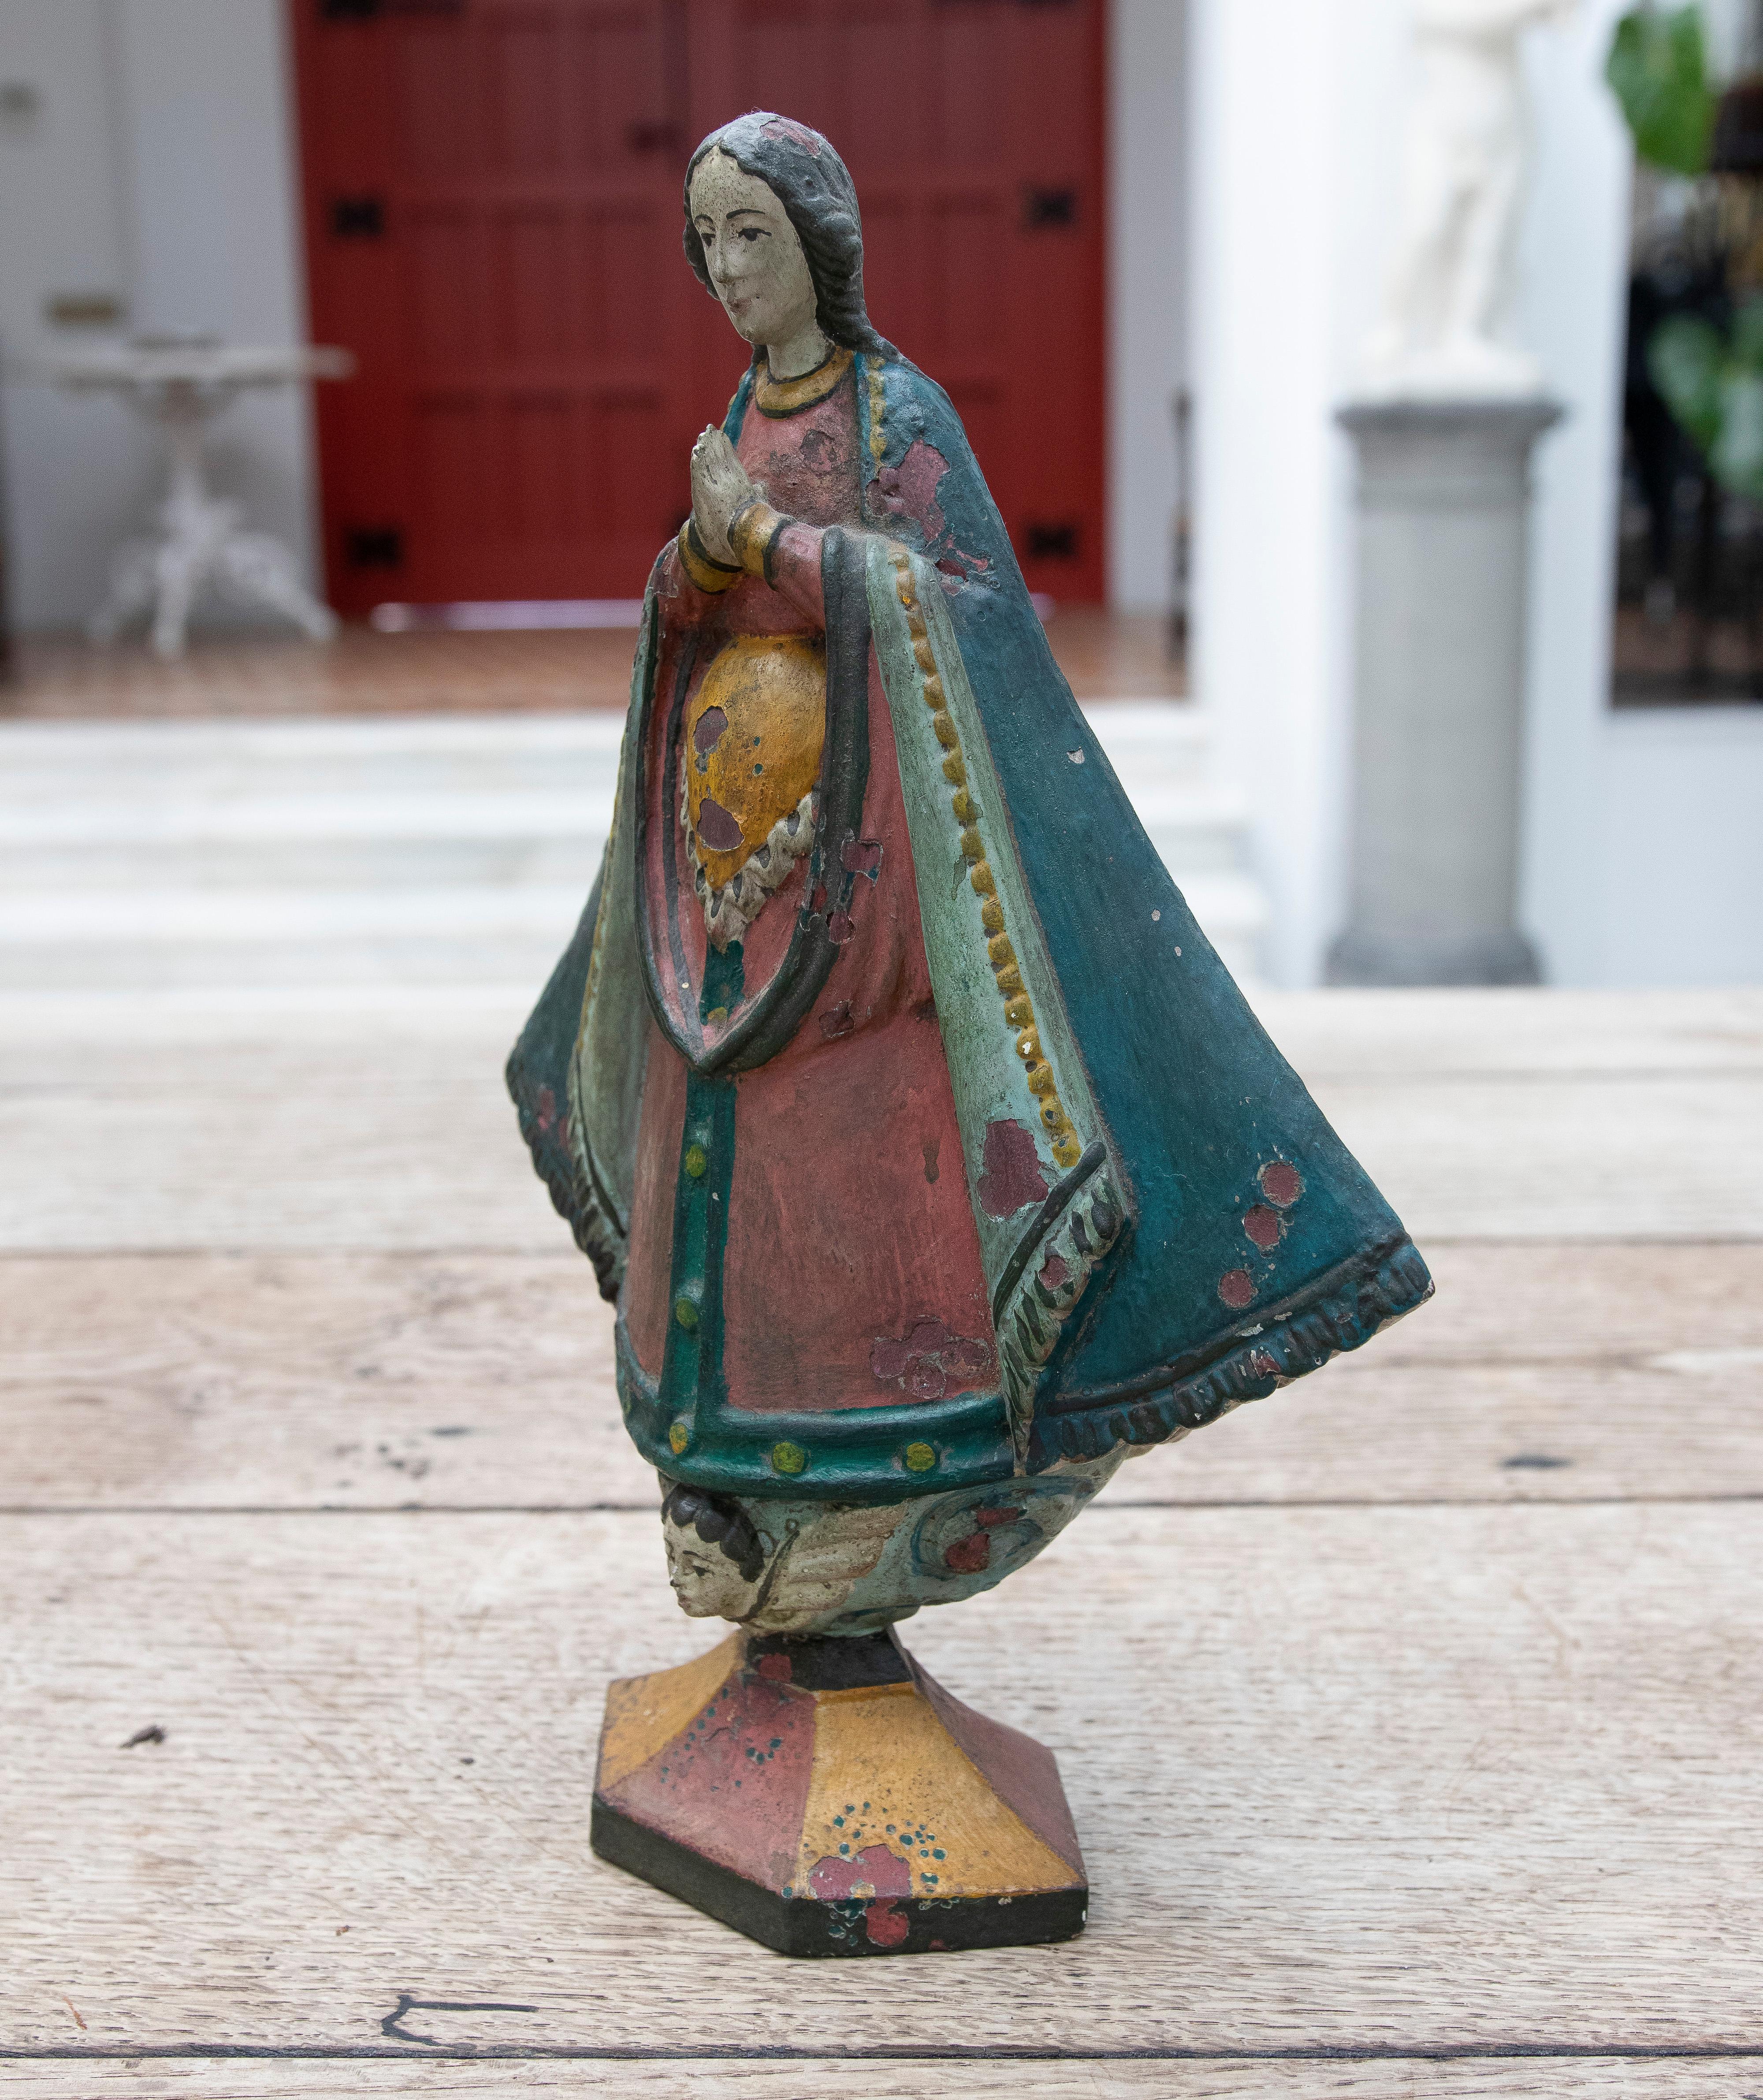 19th century Mexican wooden hand-painted virgin with child in arms.